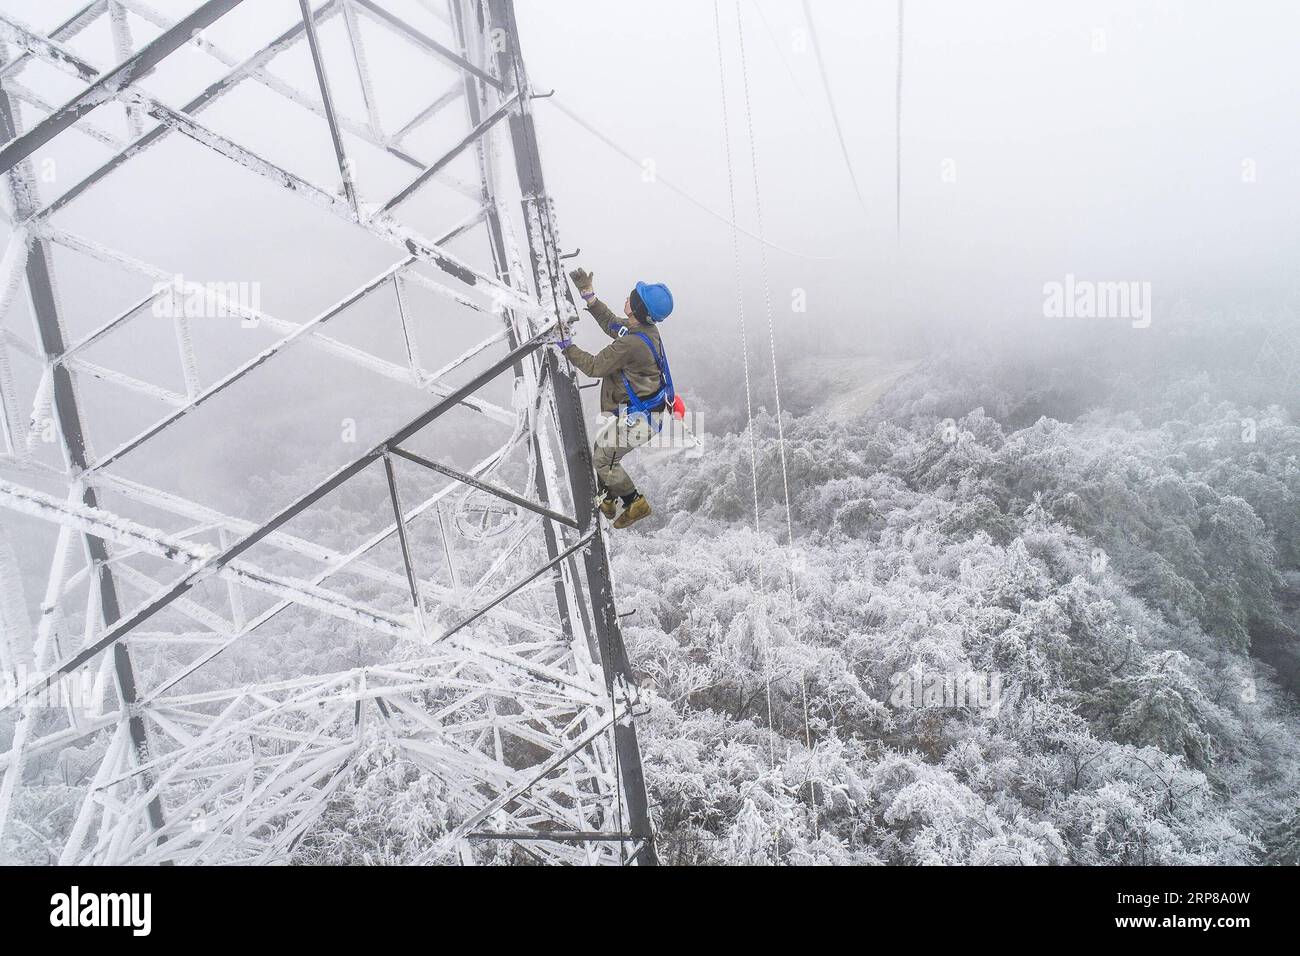 (190223) -- WUHAN, Feb. 23, 2019 -- Photo taken on Feb. 12, 2019 shows electrician Wang Chaolin climbing the power transmission tower for rush repairs in the mountain area of Wuhan, capital of central China s Hubei Province. A team of electricians was dispatched to repair a high voltage wire that was broken due to thick layer of ice accumulation. After one day s work on the over 40-meter-high power transmission tower in bad weather condition, the team succeeded in fixing the failed power system that lowered the trains speed causing delay during the post-holiday travel peak. This year s Spring Stock Photo